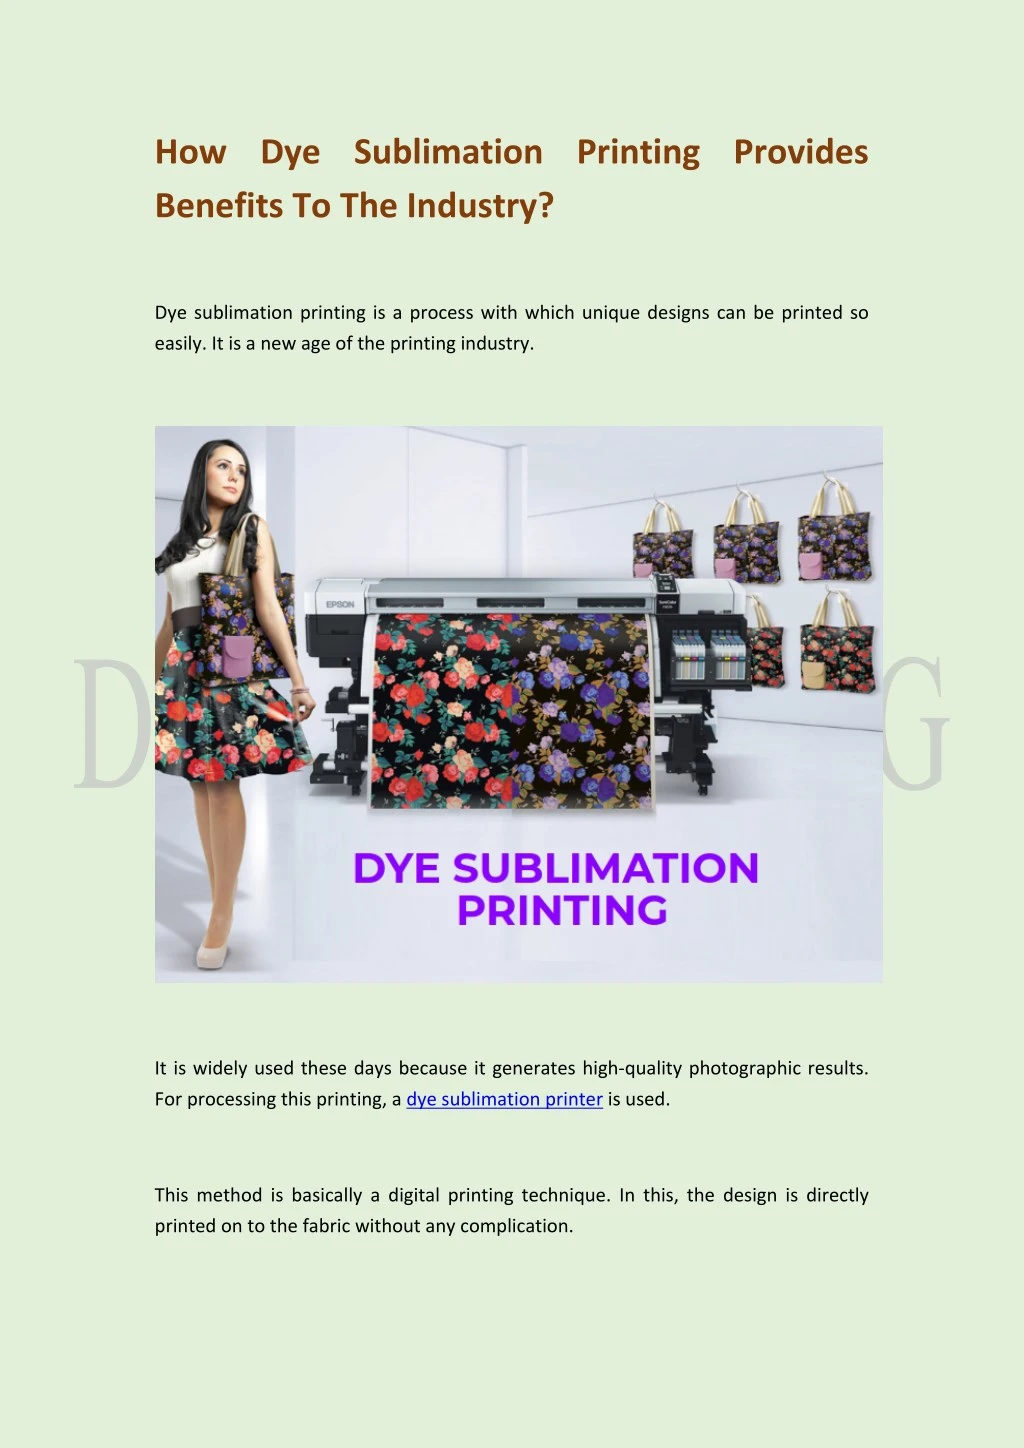 how dye sublimation printing provides benefits